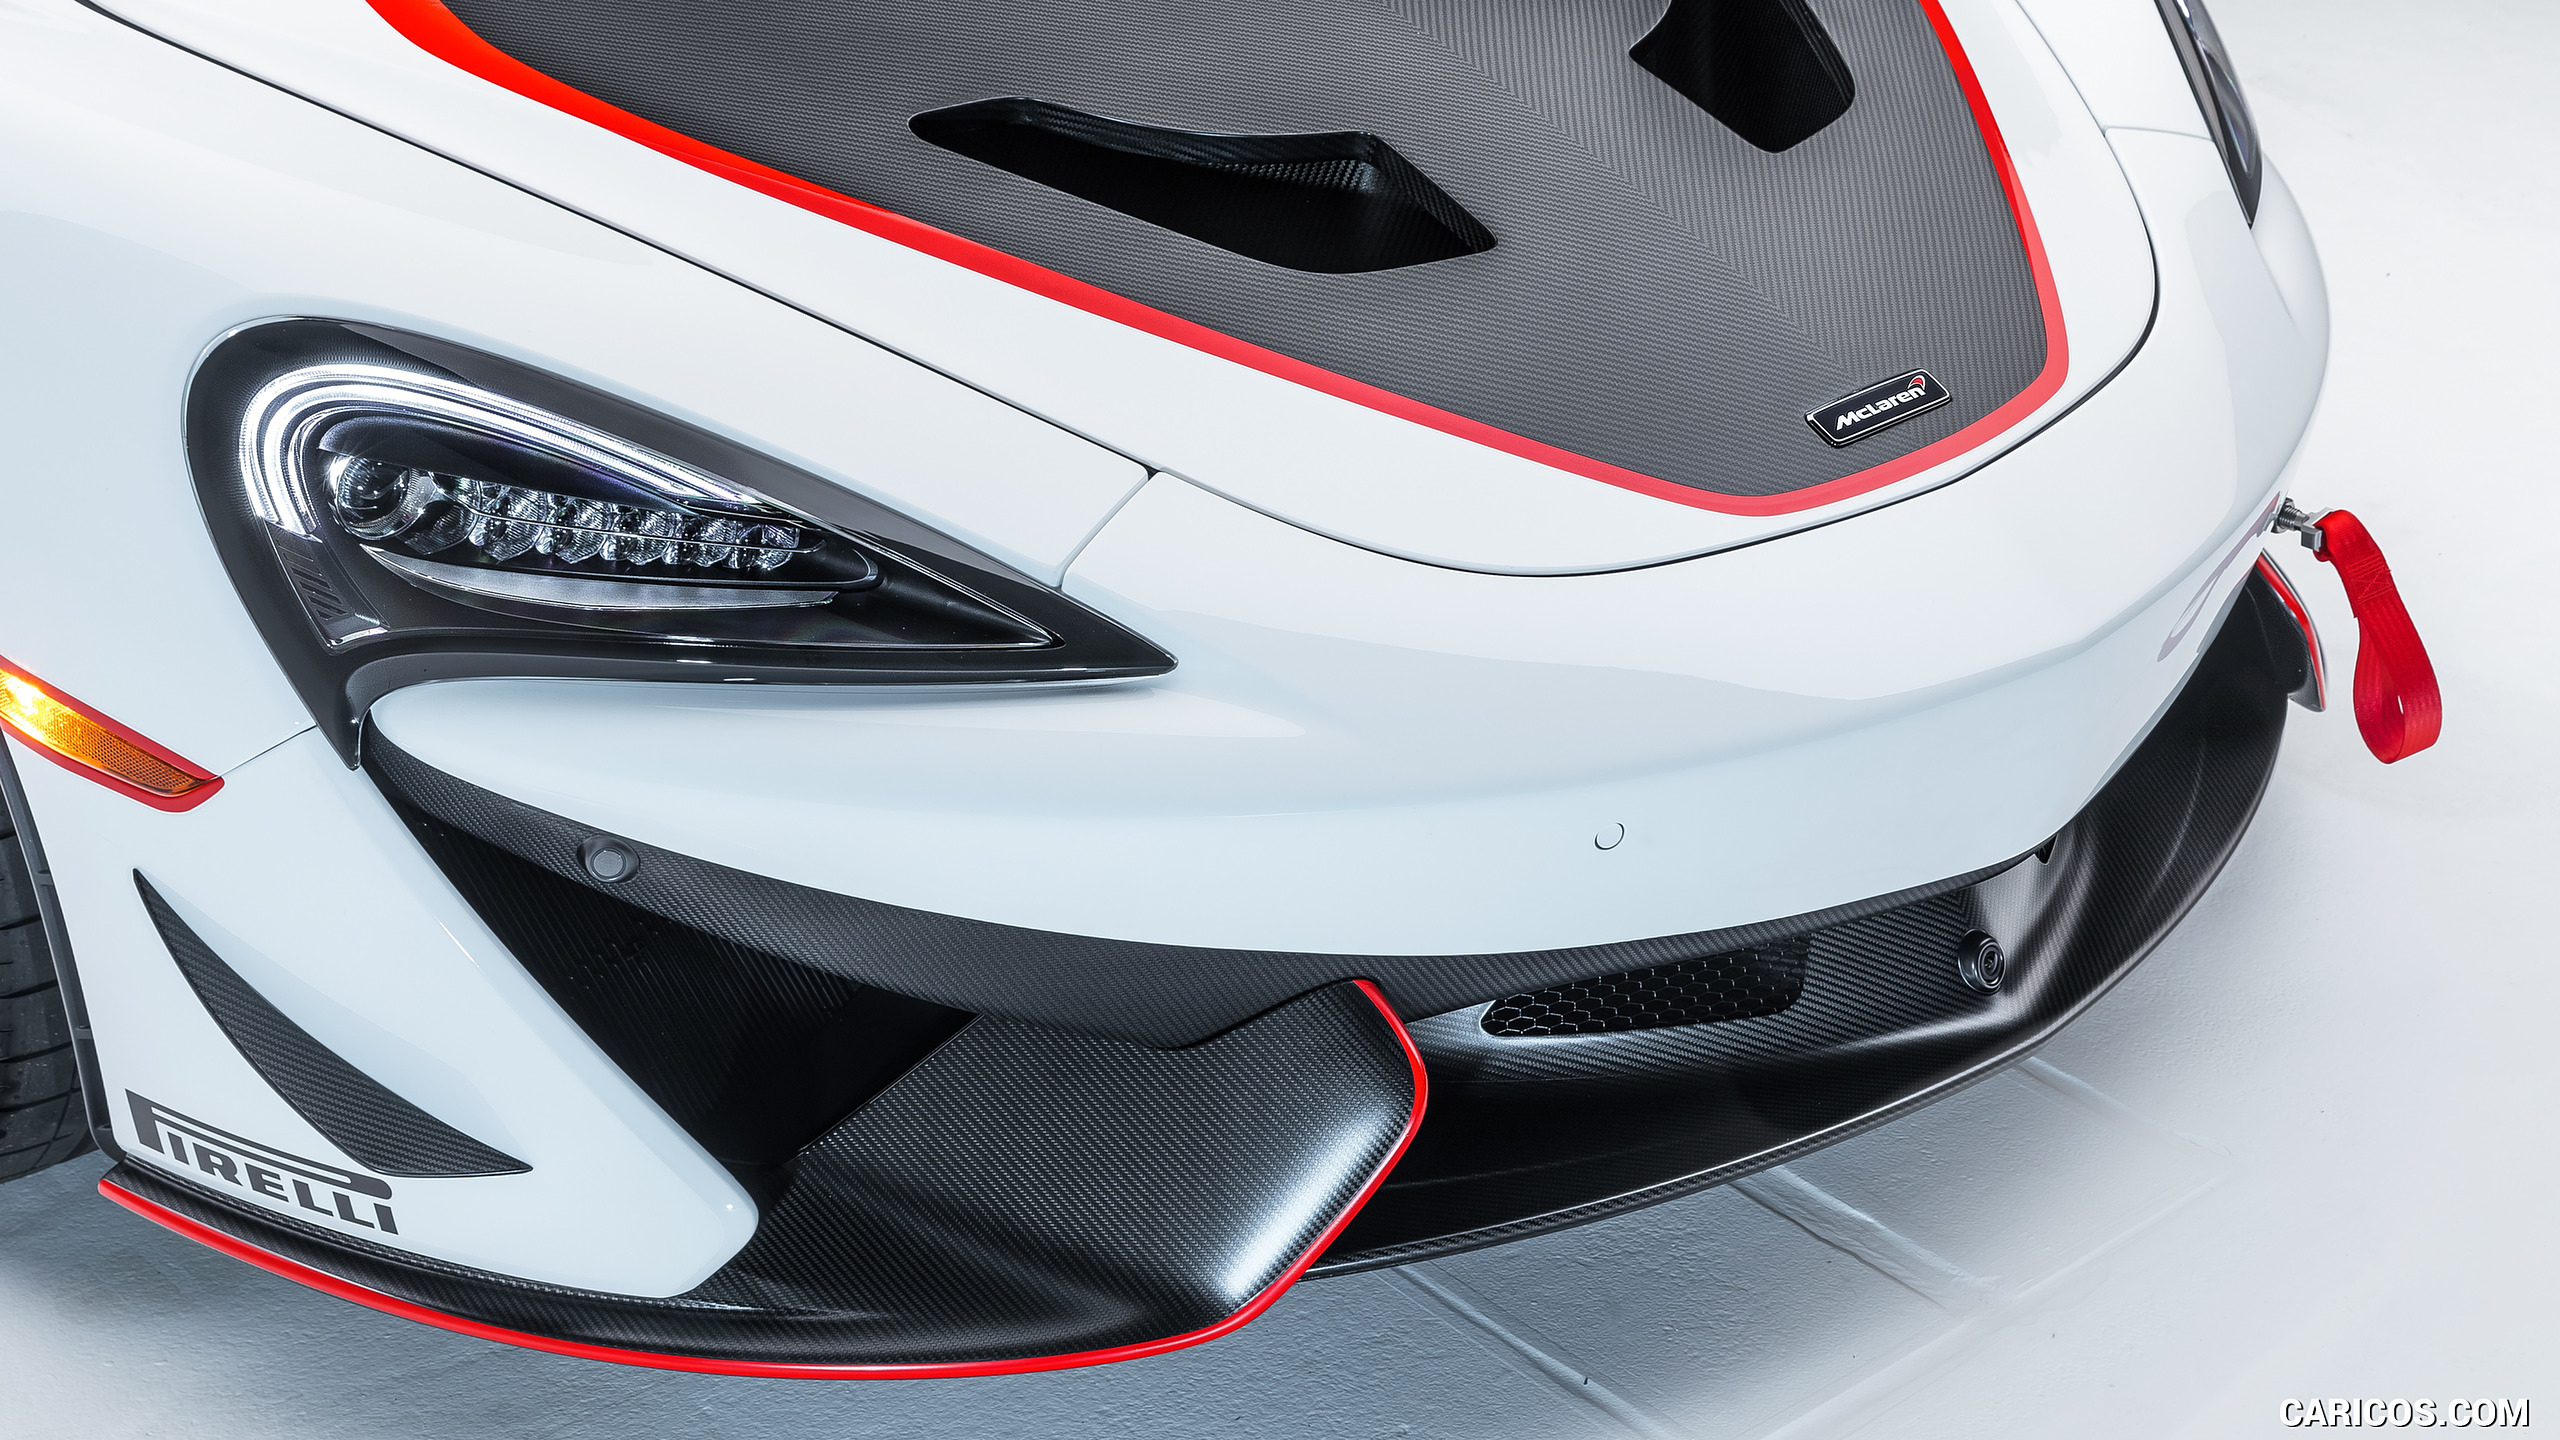 2018 McLaren 570S GT4 MSO X No. 8 White Red And Blue Accents - Detail, #6 of 22